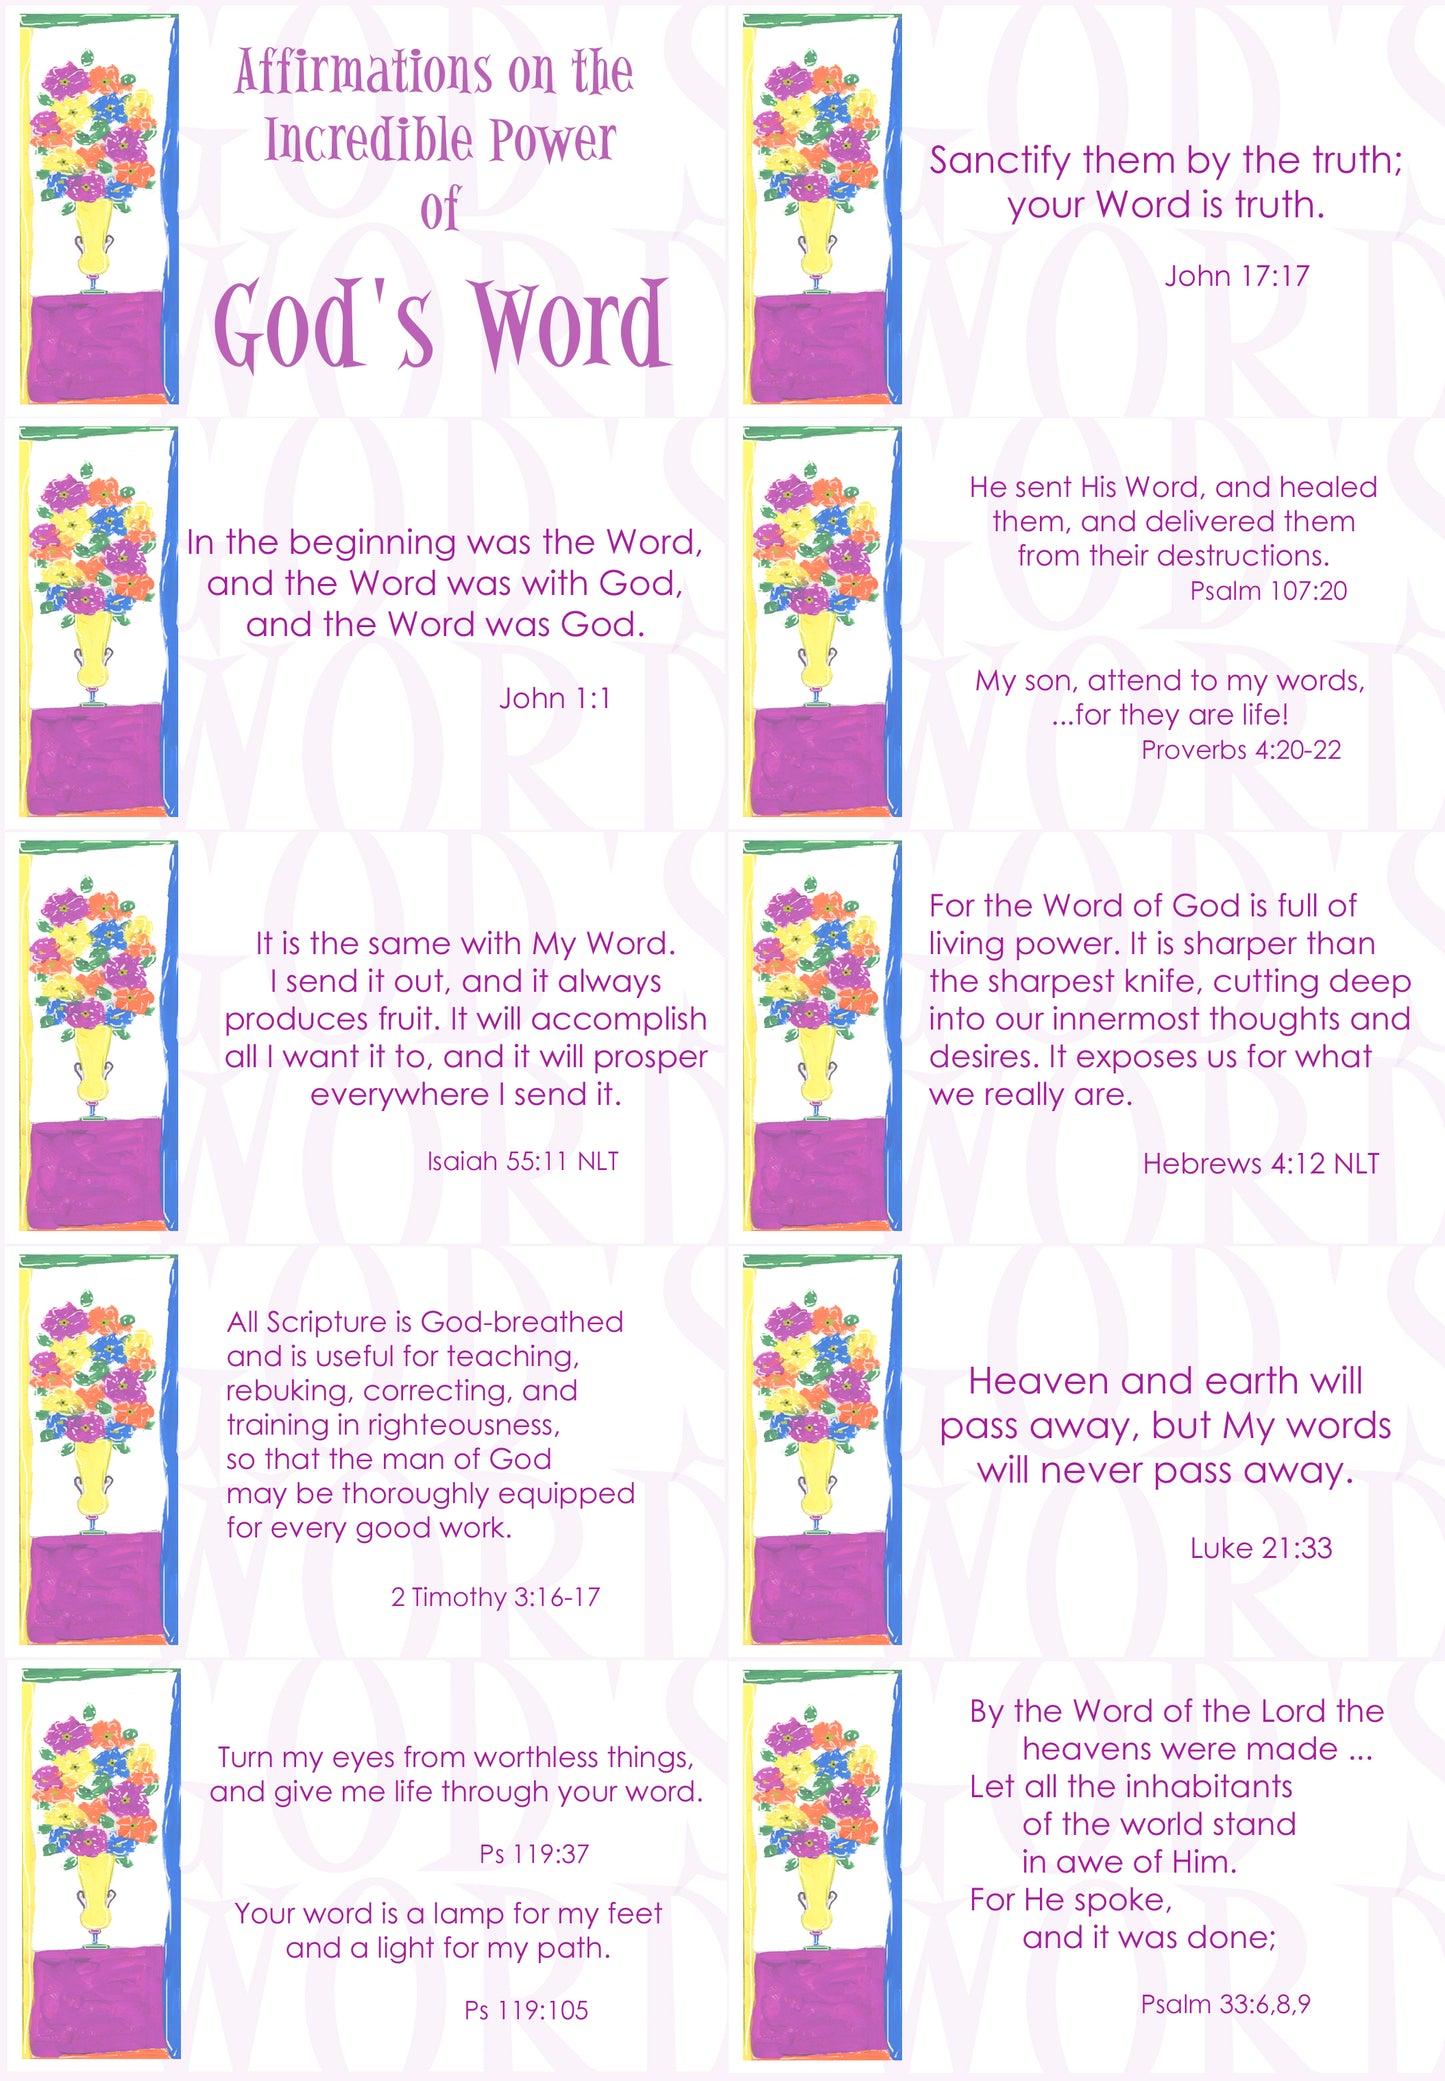 Affirmations from God - Incredible Power of God's Word